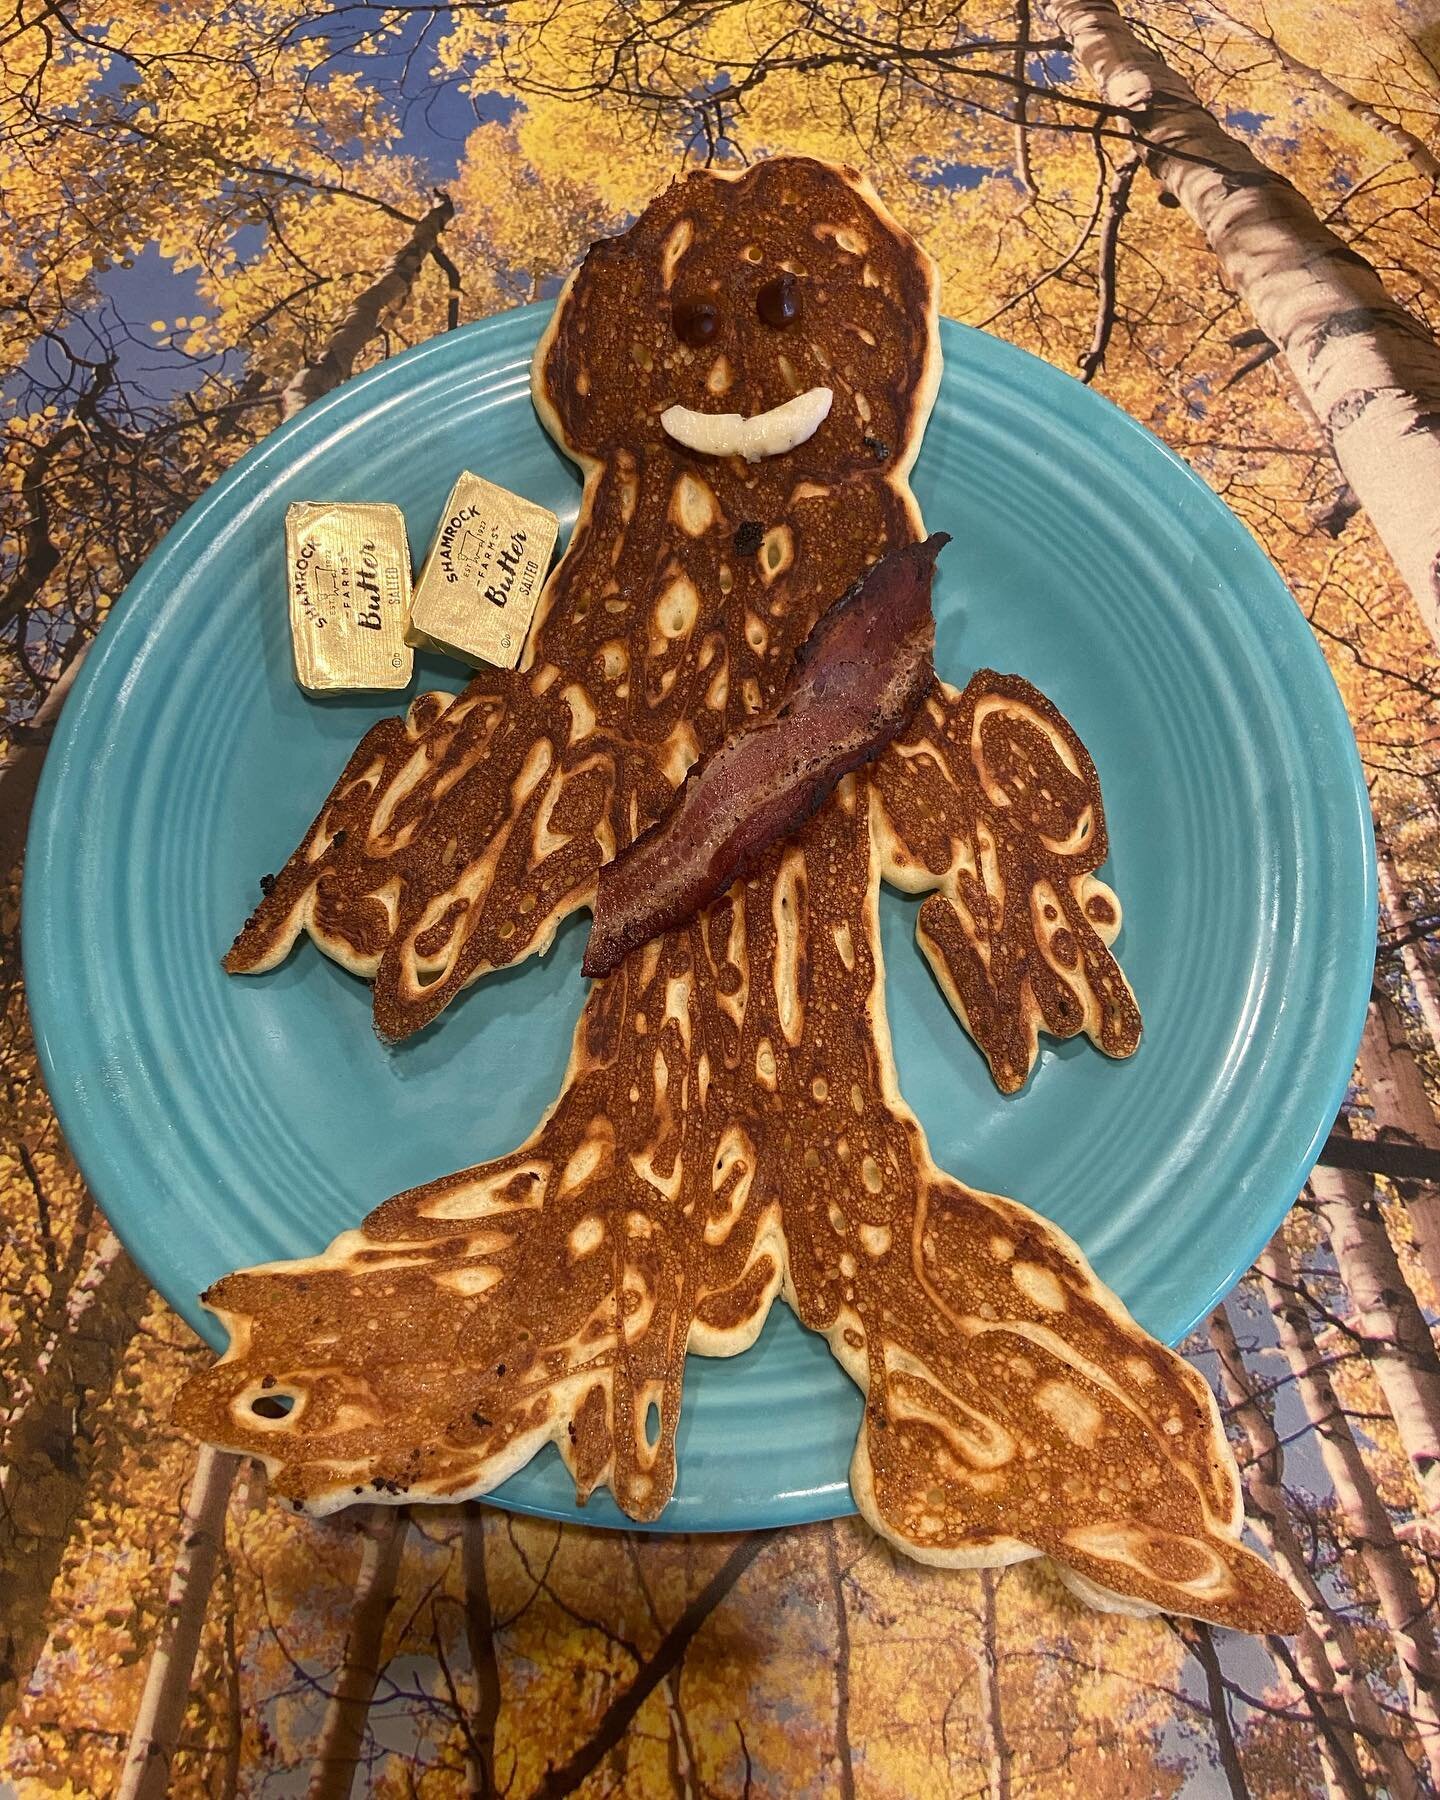 May the 4th be with you. @chefthebear with another amazing pancake 🥞 design. 🔥